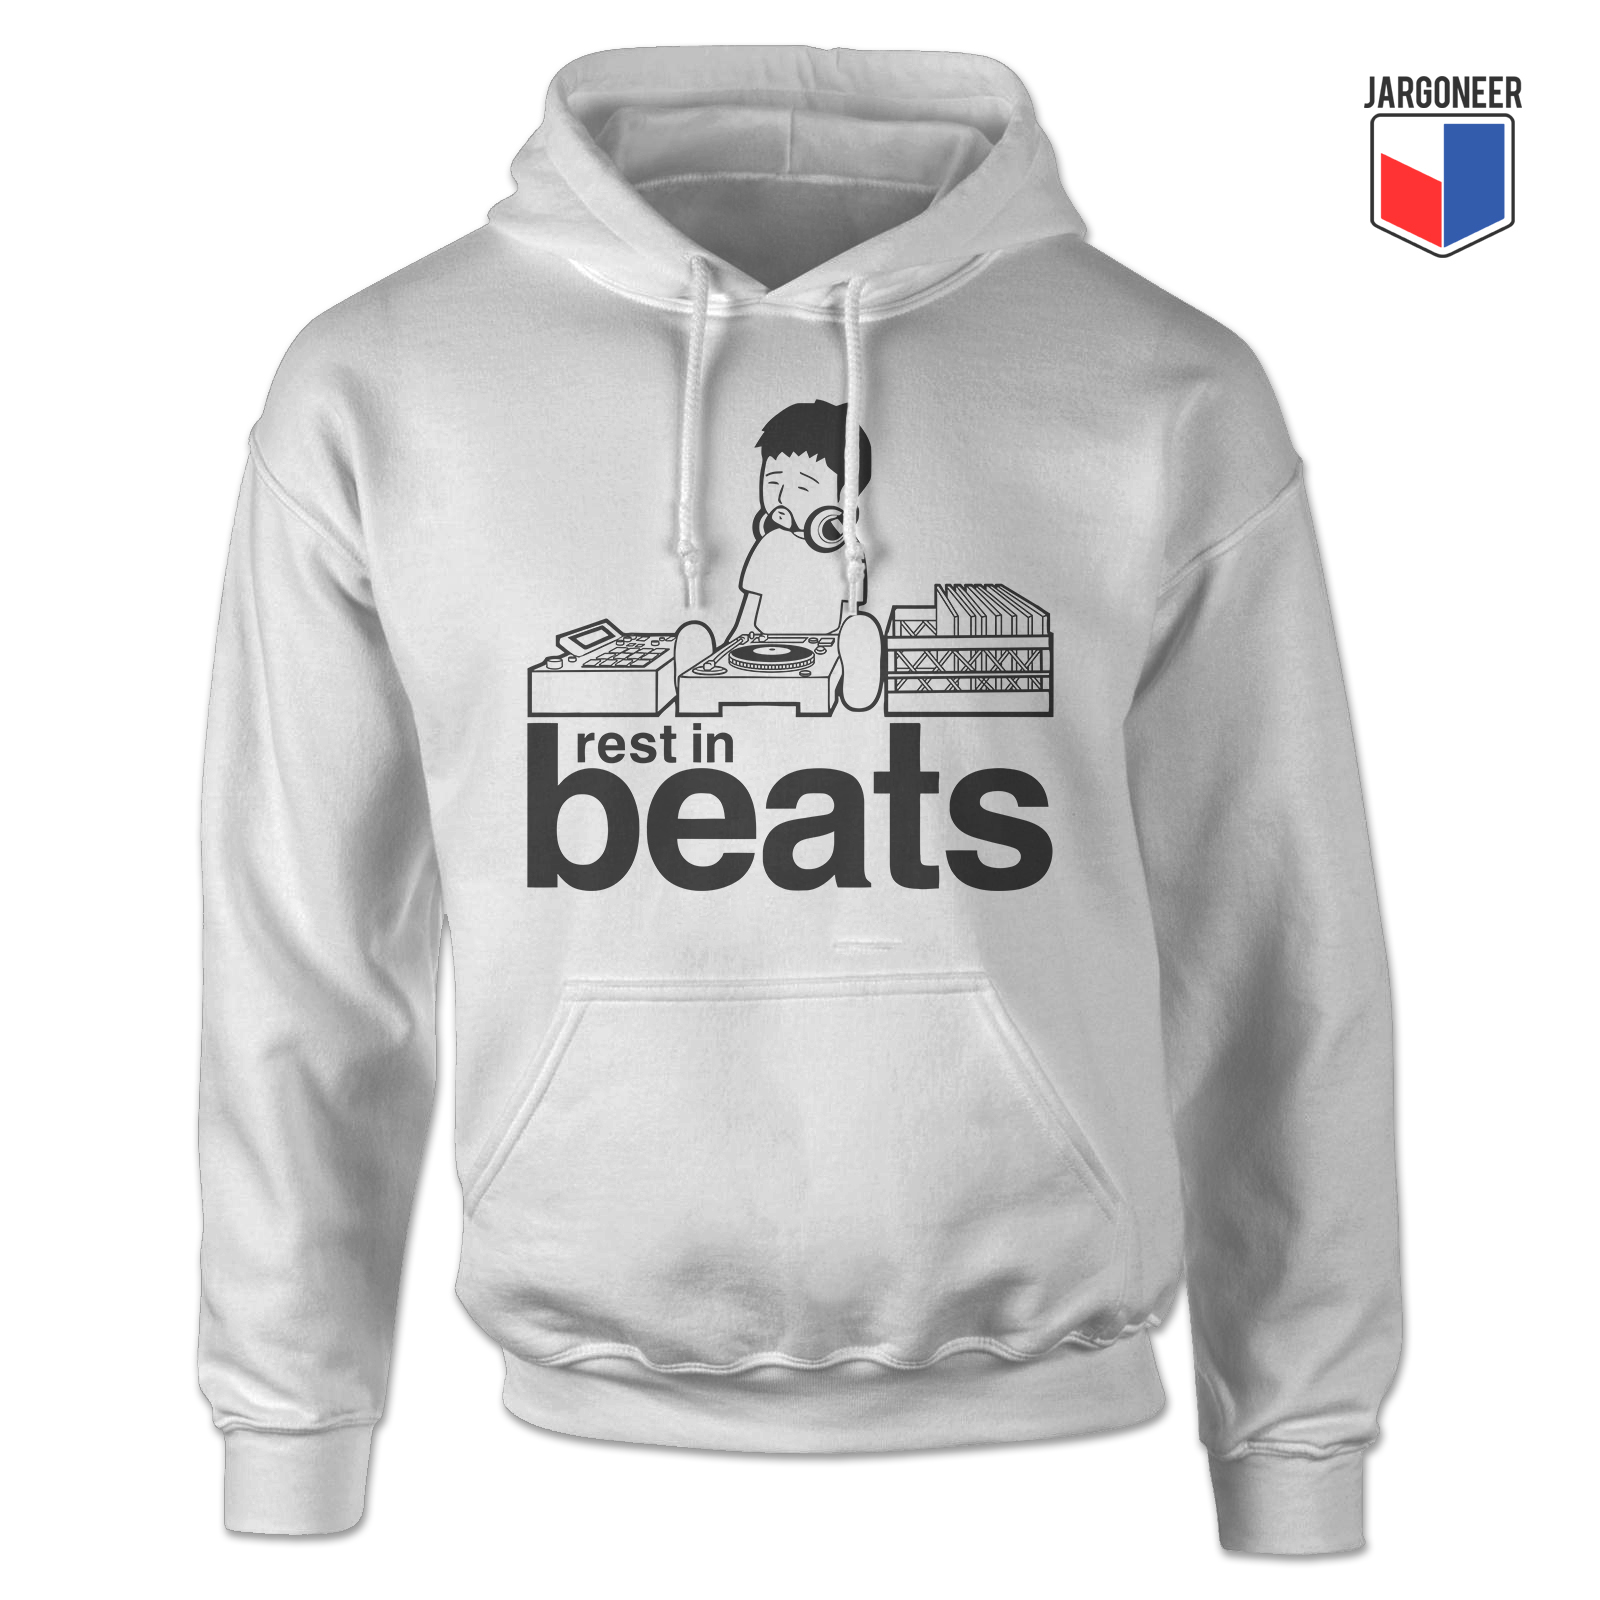 Rest In Beats White Hoody - Shop Unique Graphic Cool Shirt Designs